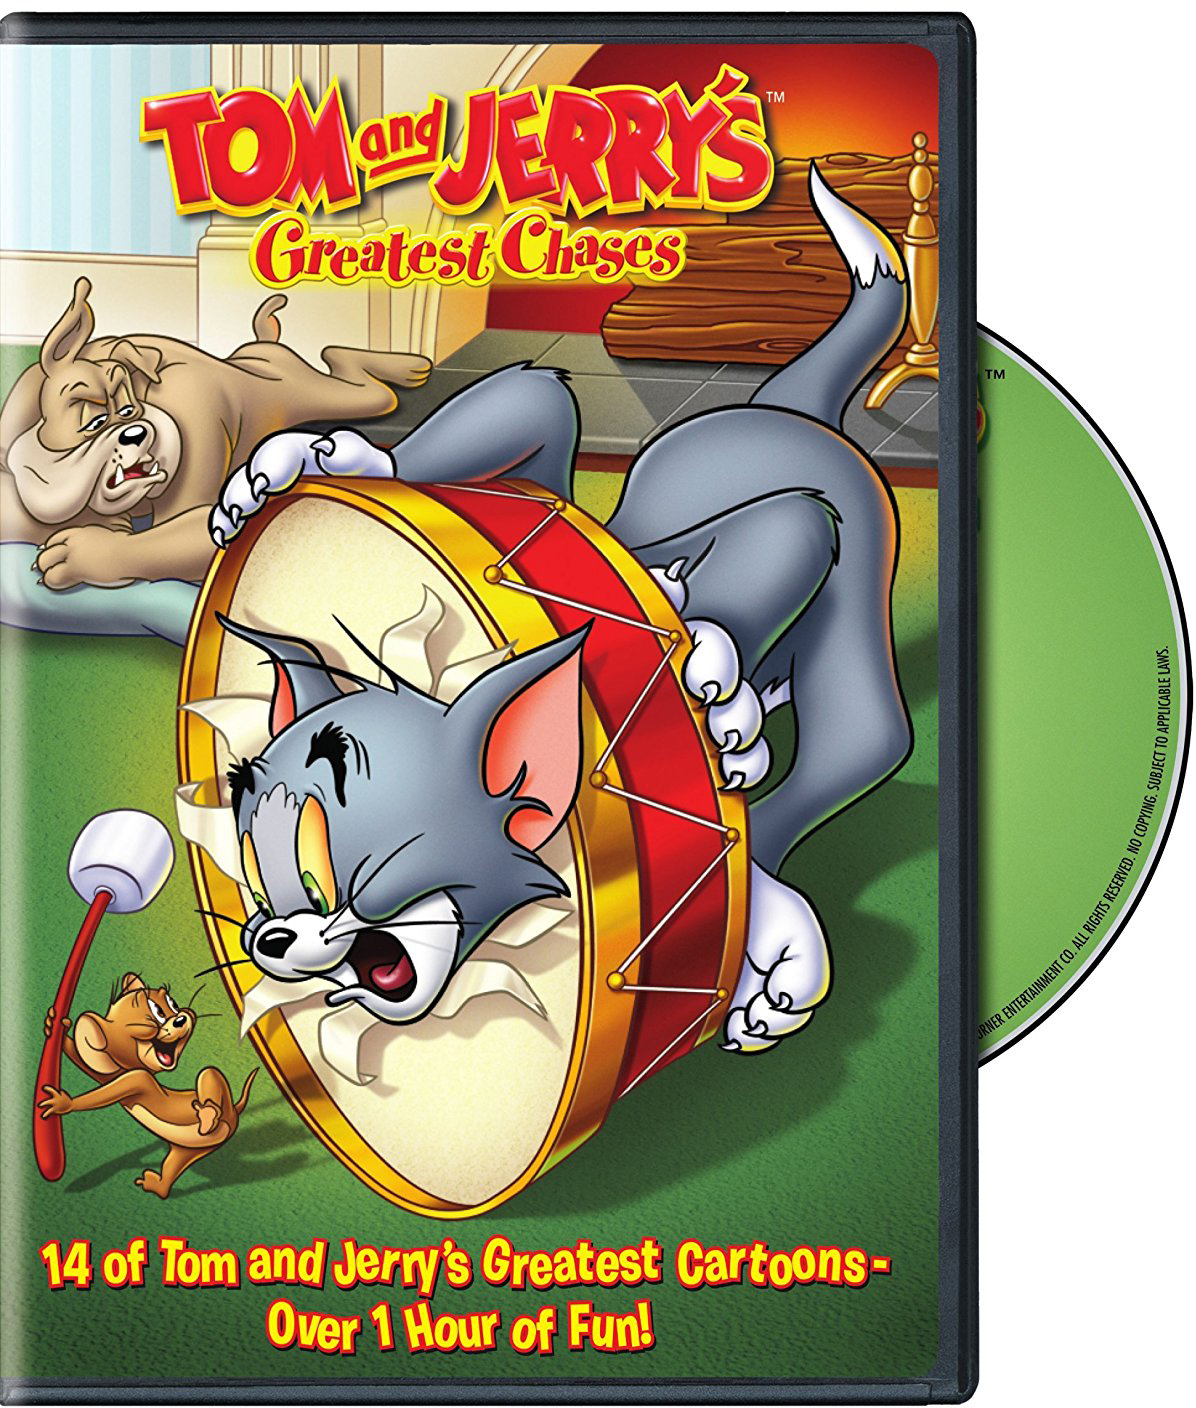 Tom & Jerrys Greatest Chases